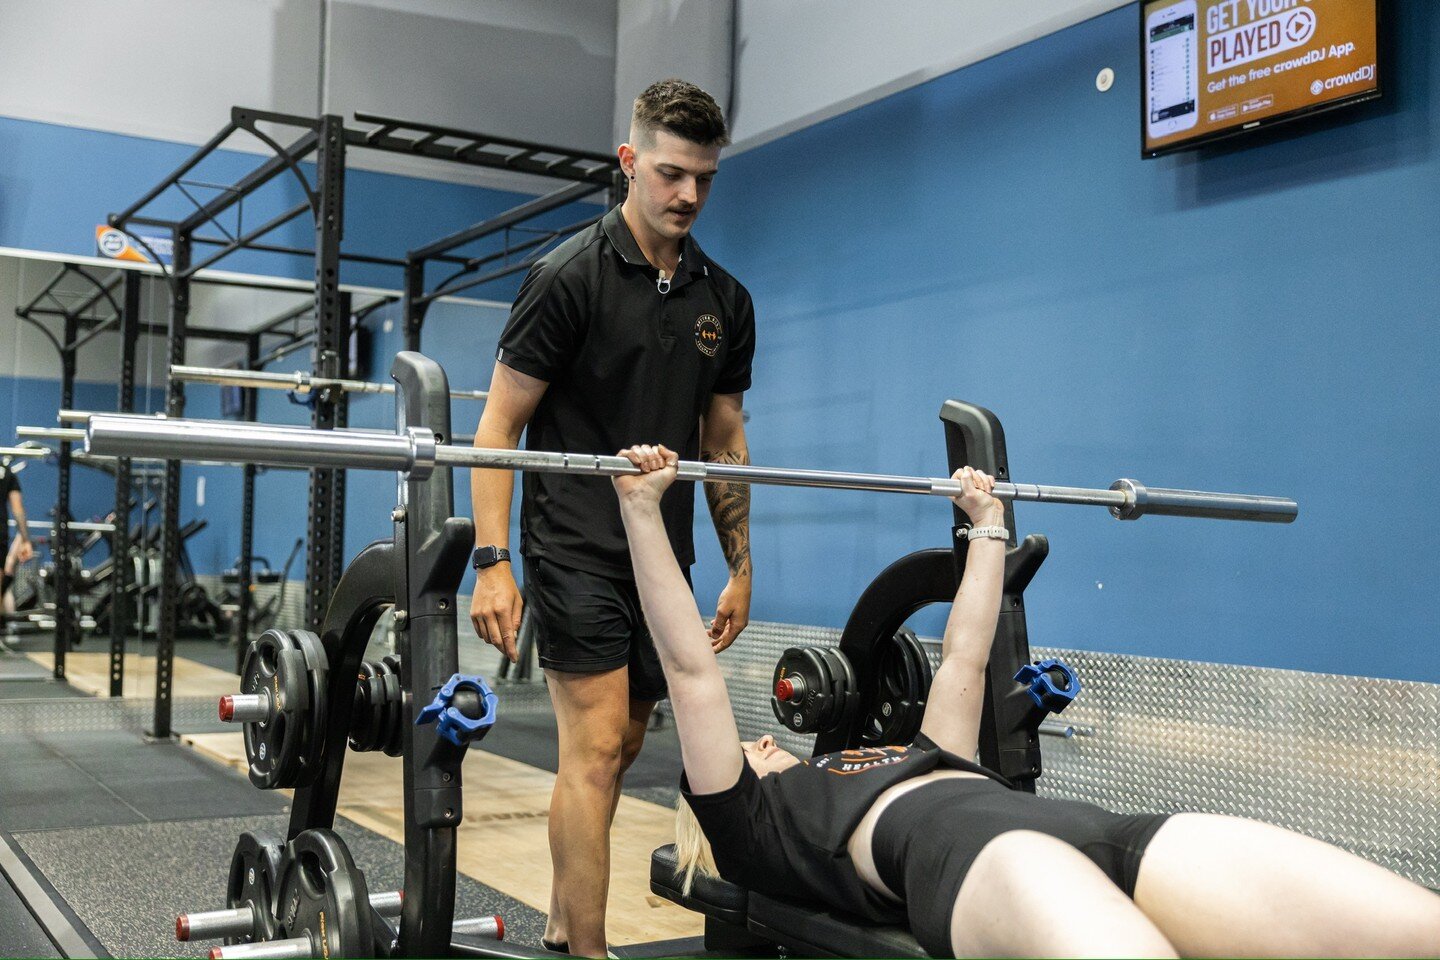 Transform Your Fitness Journey with Better Body Health and Fitness 💪🏋️&zwj;♂️

At Better Body Health and Fitness, we're on a mission to help you become the best version of yourself. Whether you're just starting your fitness journey or you're a seas